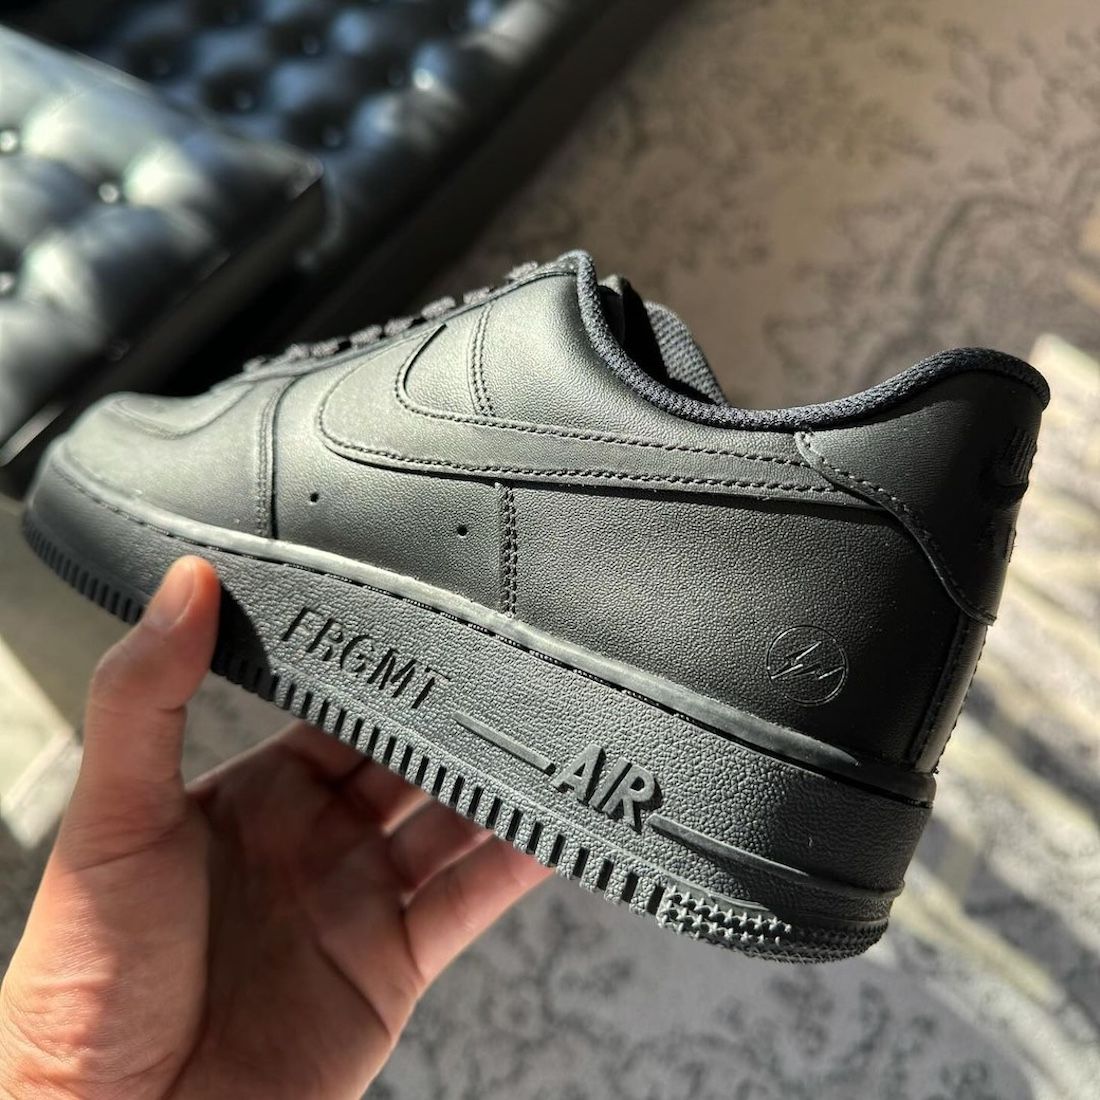 The Fragment Design x Nike Air Force 1 Low Appears in 